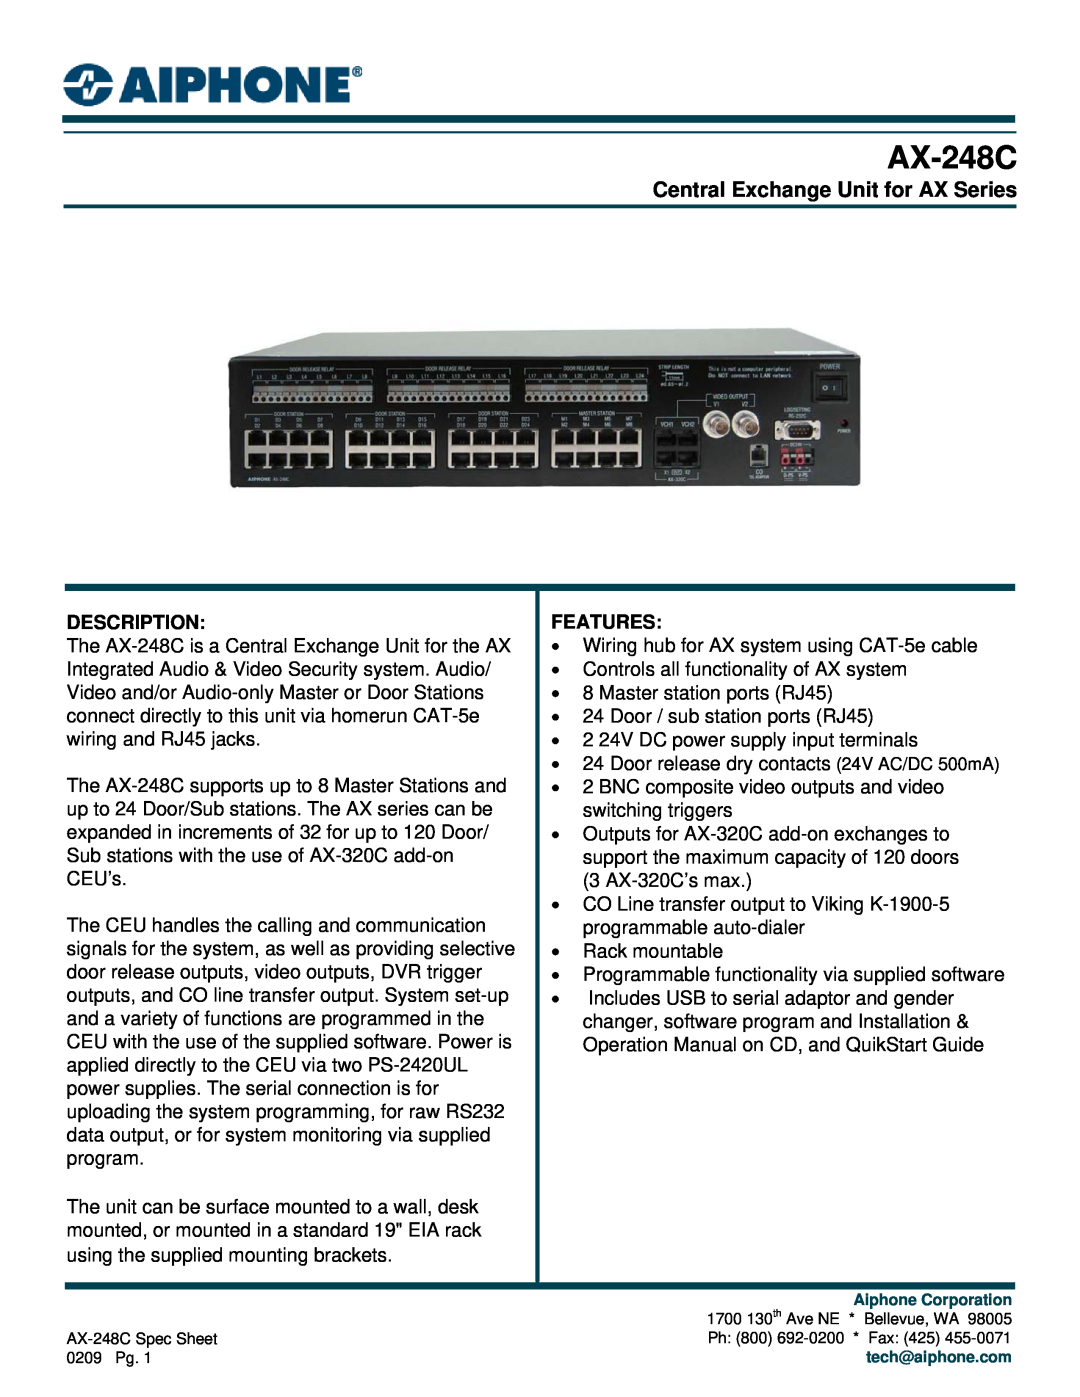 Aiphone AX-248C operation manual Central Exchange Unit for AX Series, Description, Features 